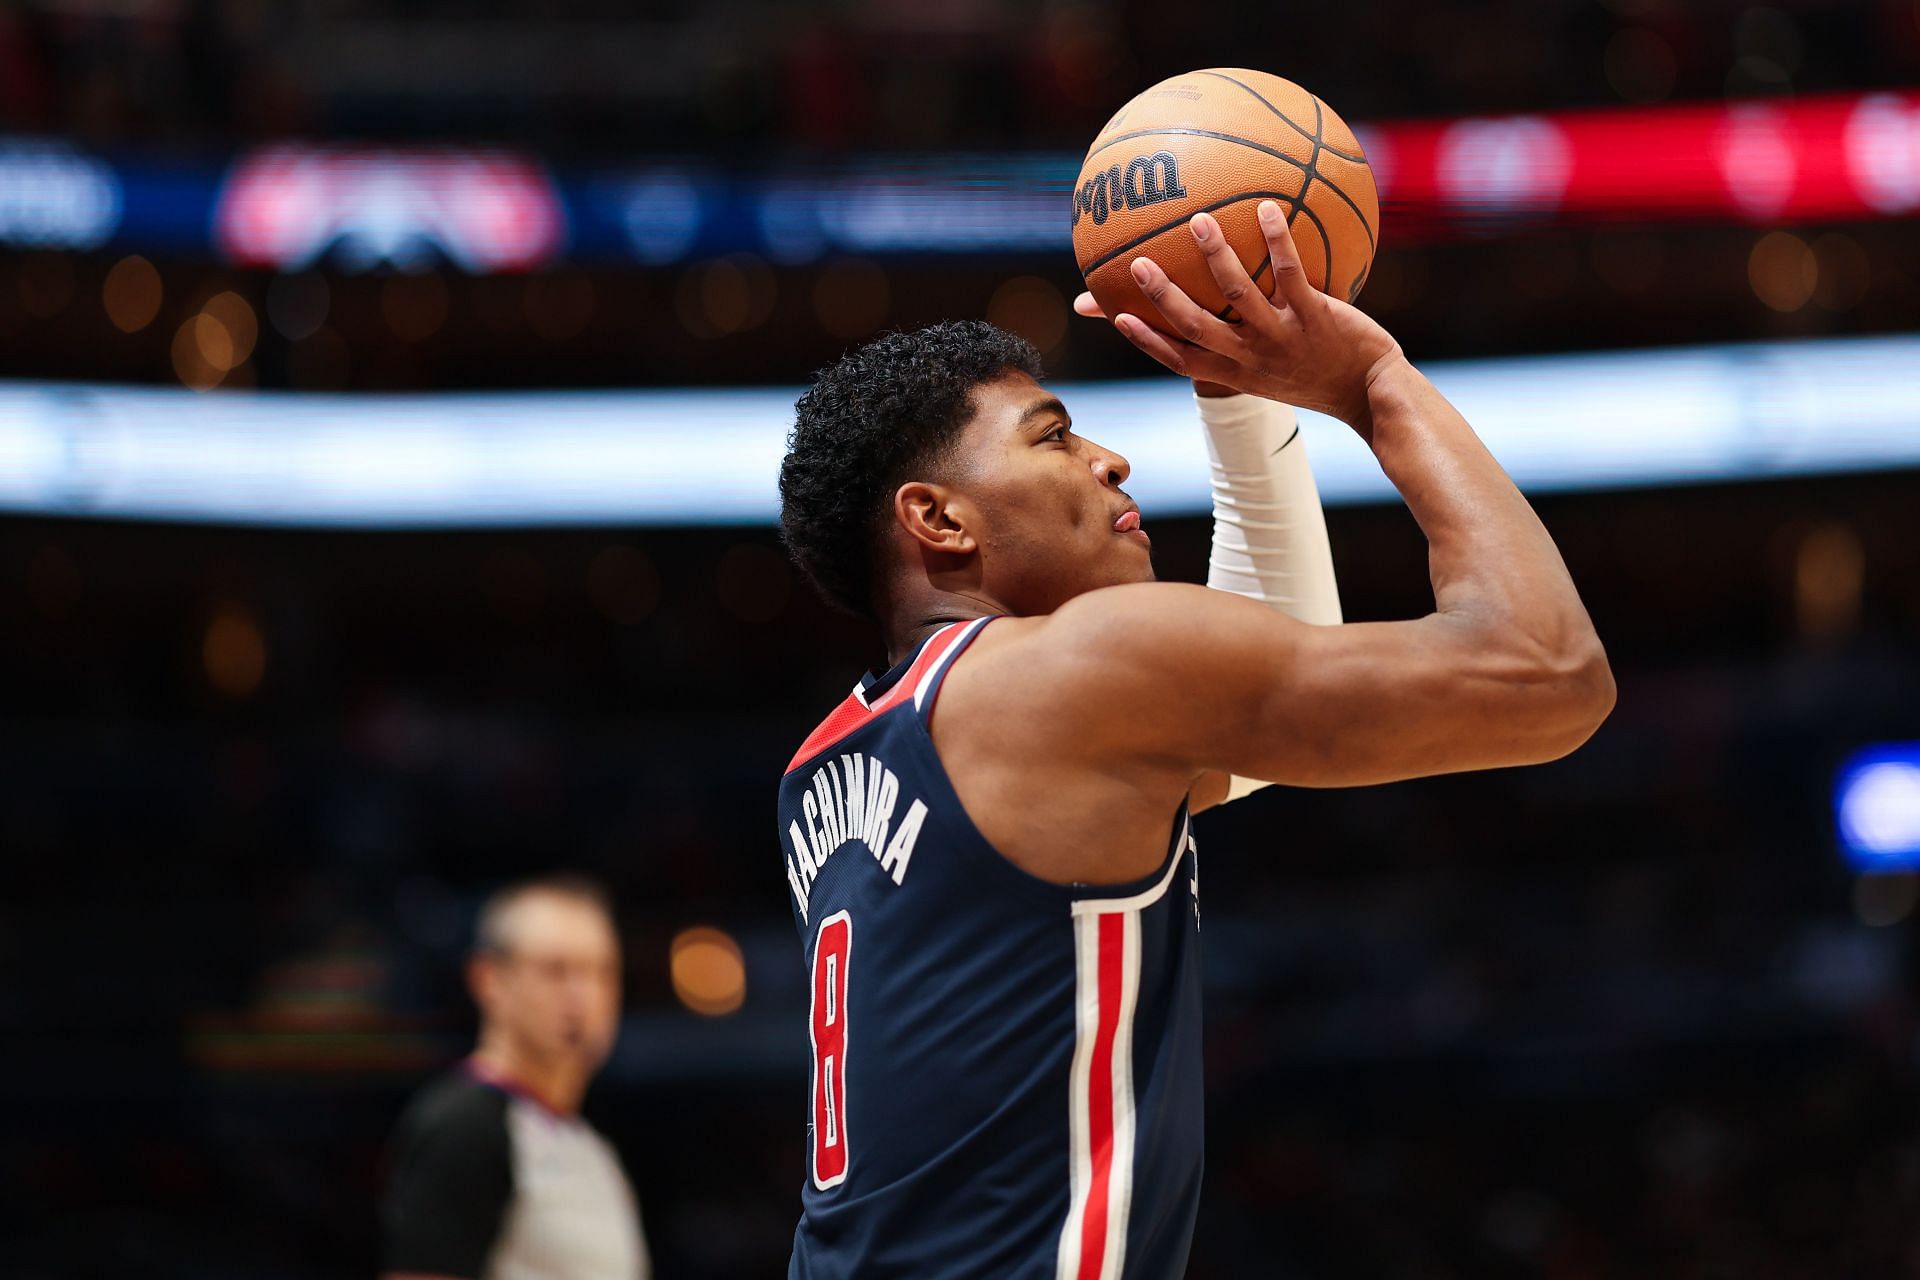 Washington Wizards forward Rui Hachimura is set to be traded to the Lakers